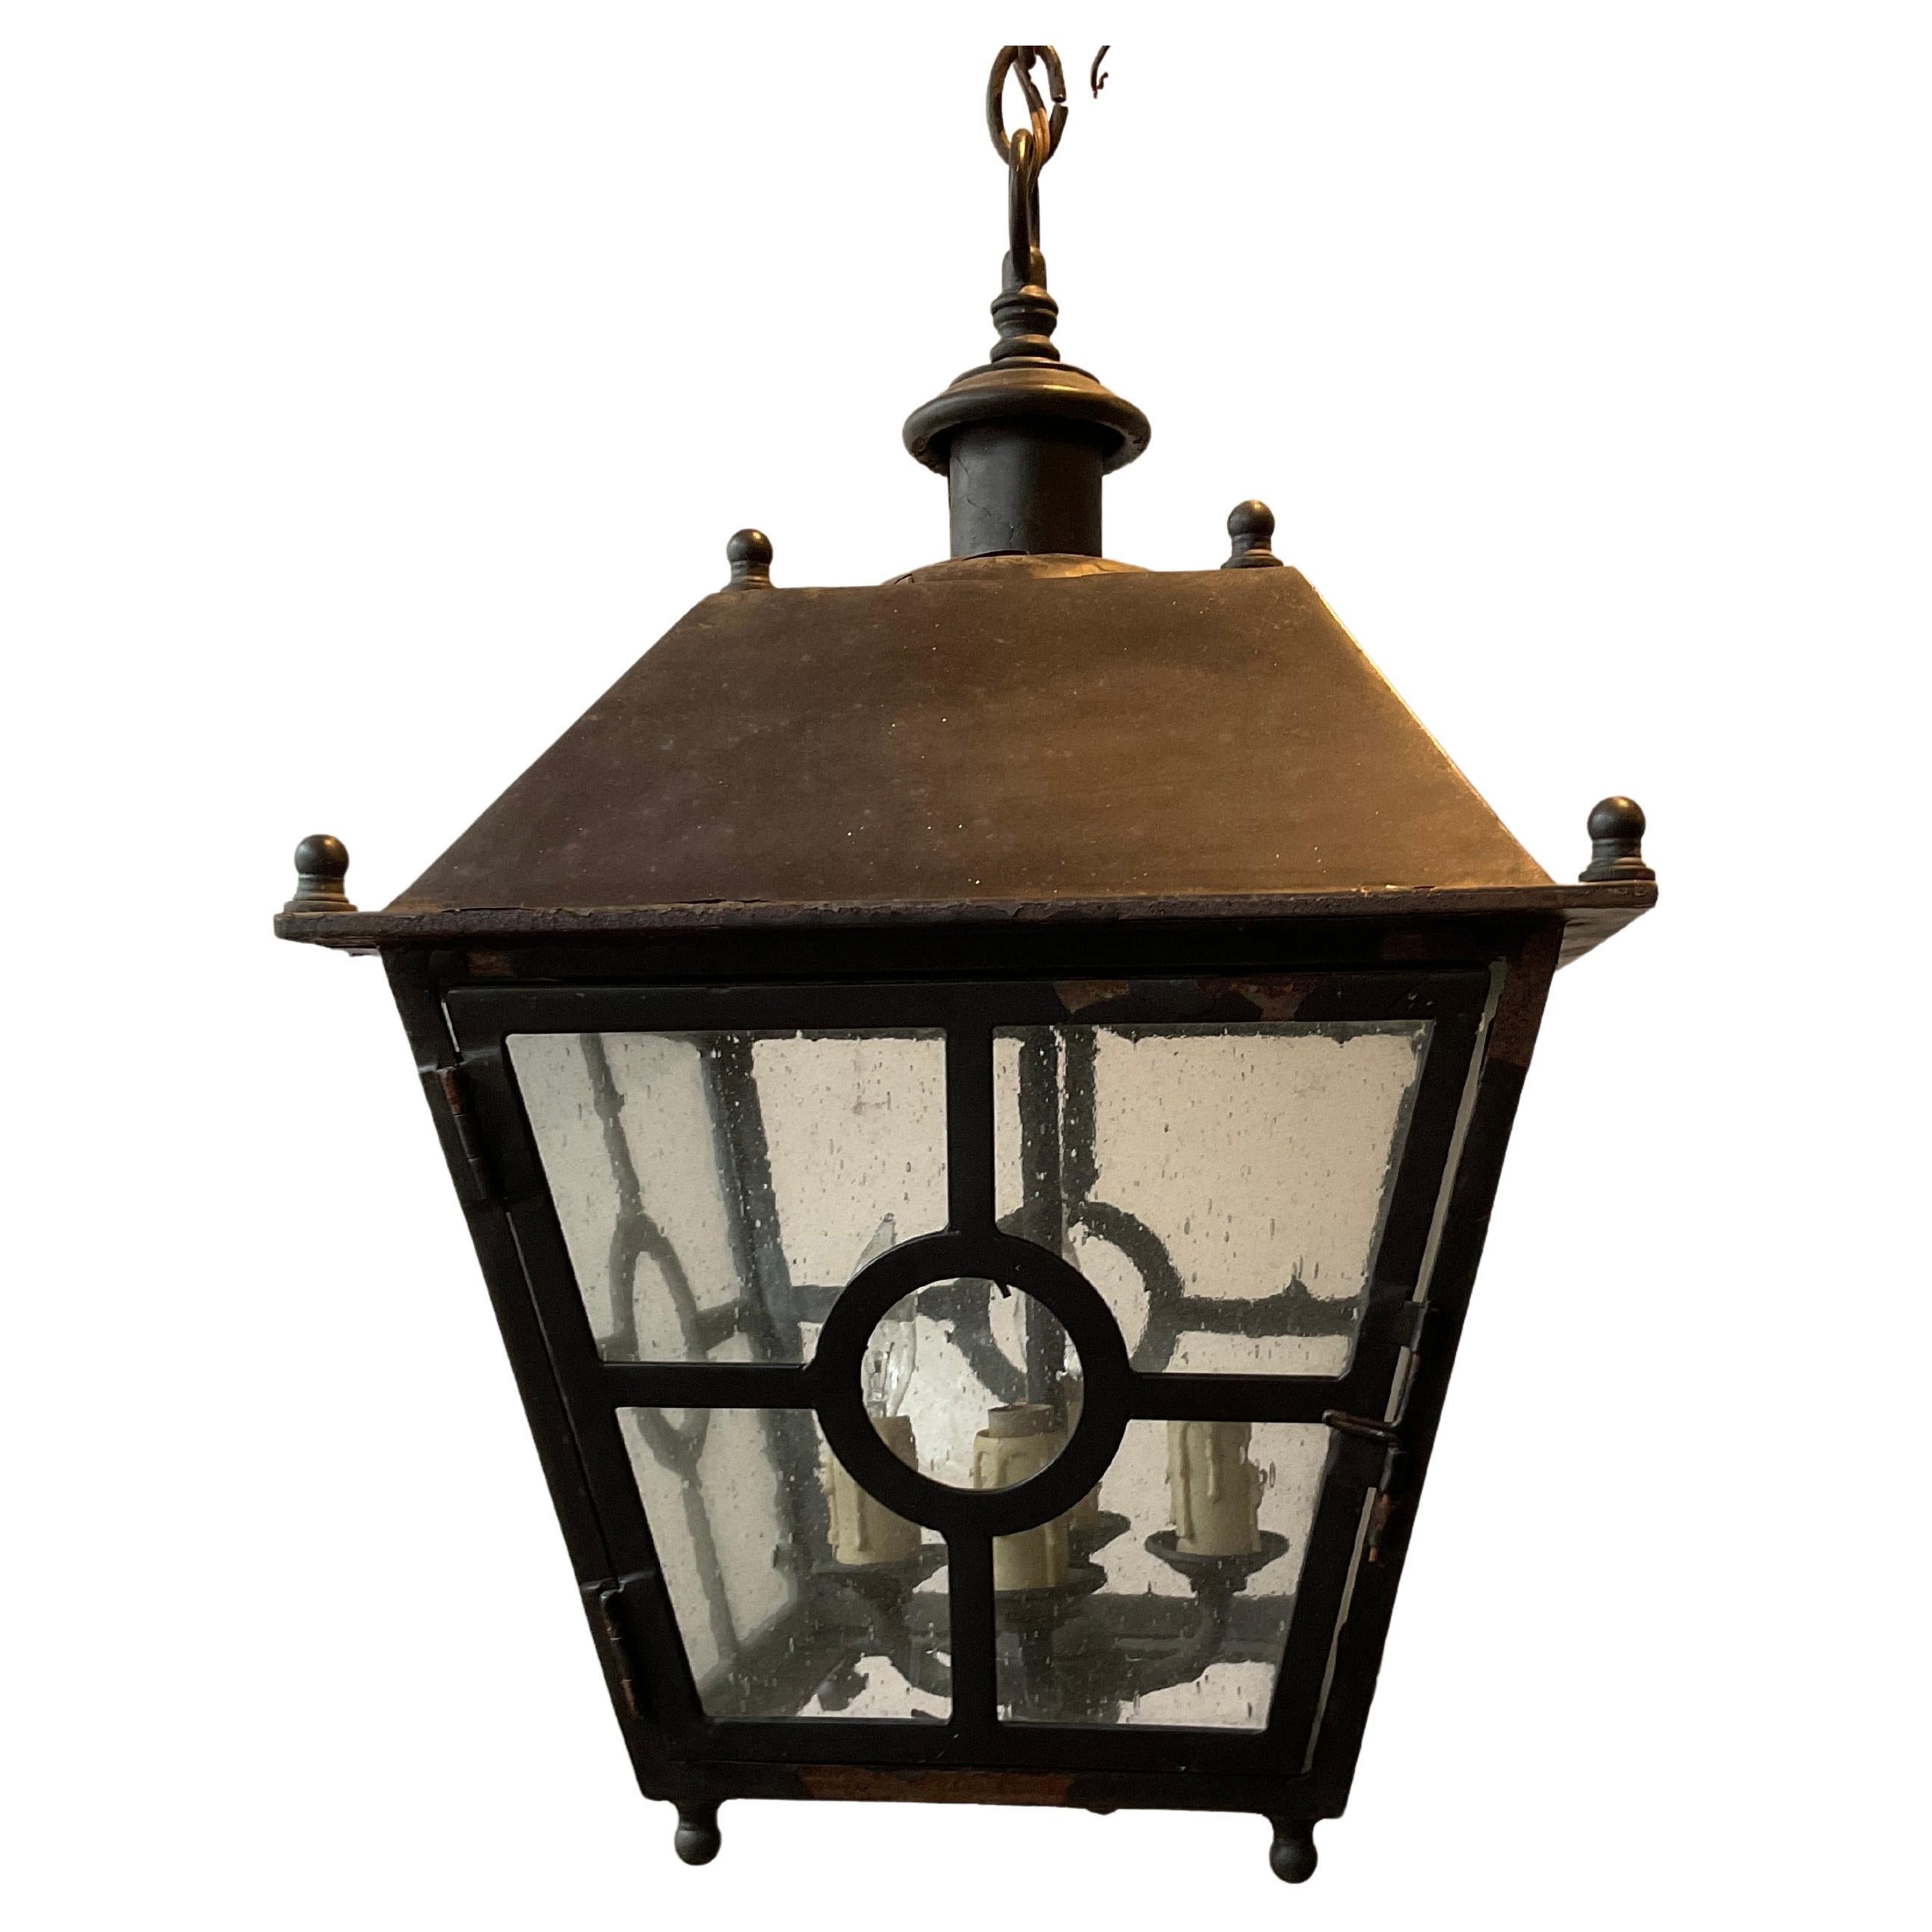 3 Steel Classical Lanterns With Antiqued Bubble Glass For Sale